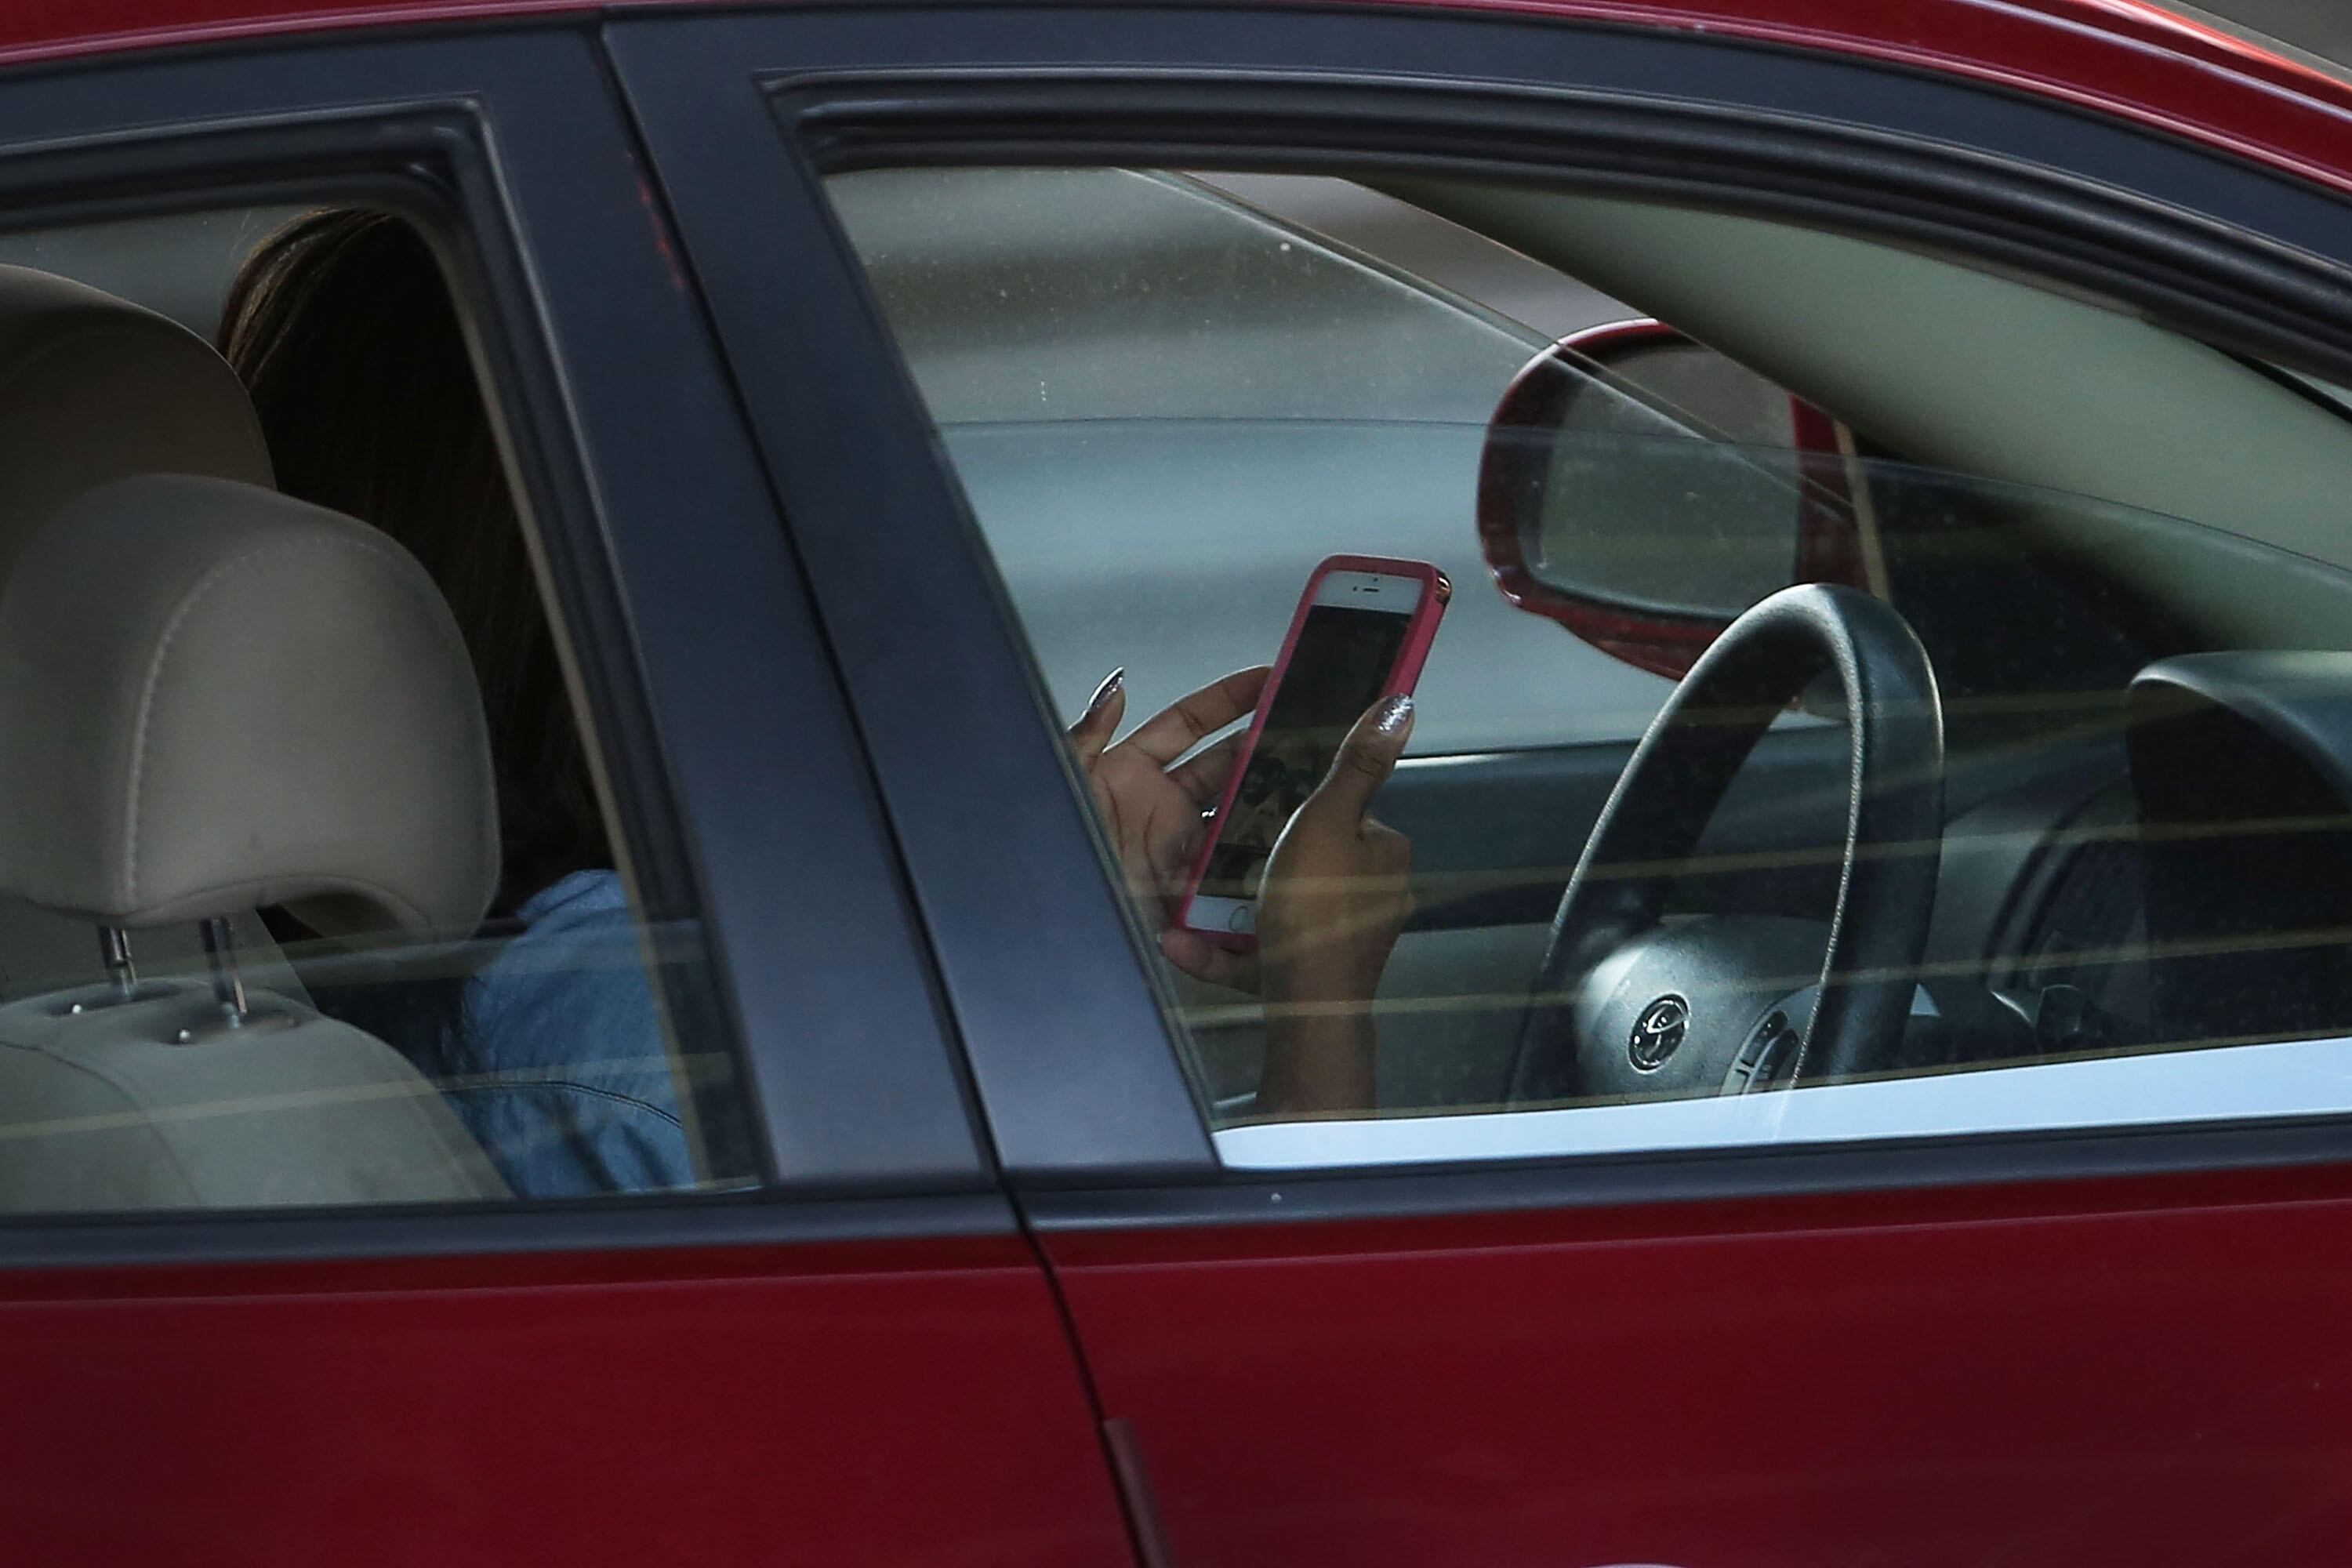 NEW YORK, NY - APRIL 30: A driver uses a phone while behind the wheel of a car on April 30, 2016 in New York City. As accidents involving drivers using phones or other personal devices mount across the country, New York lawmakers have proposed a new test 